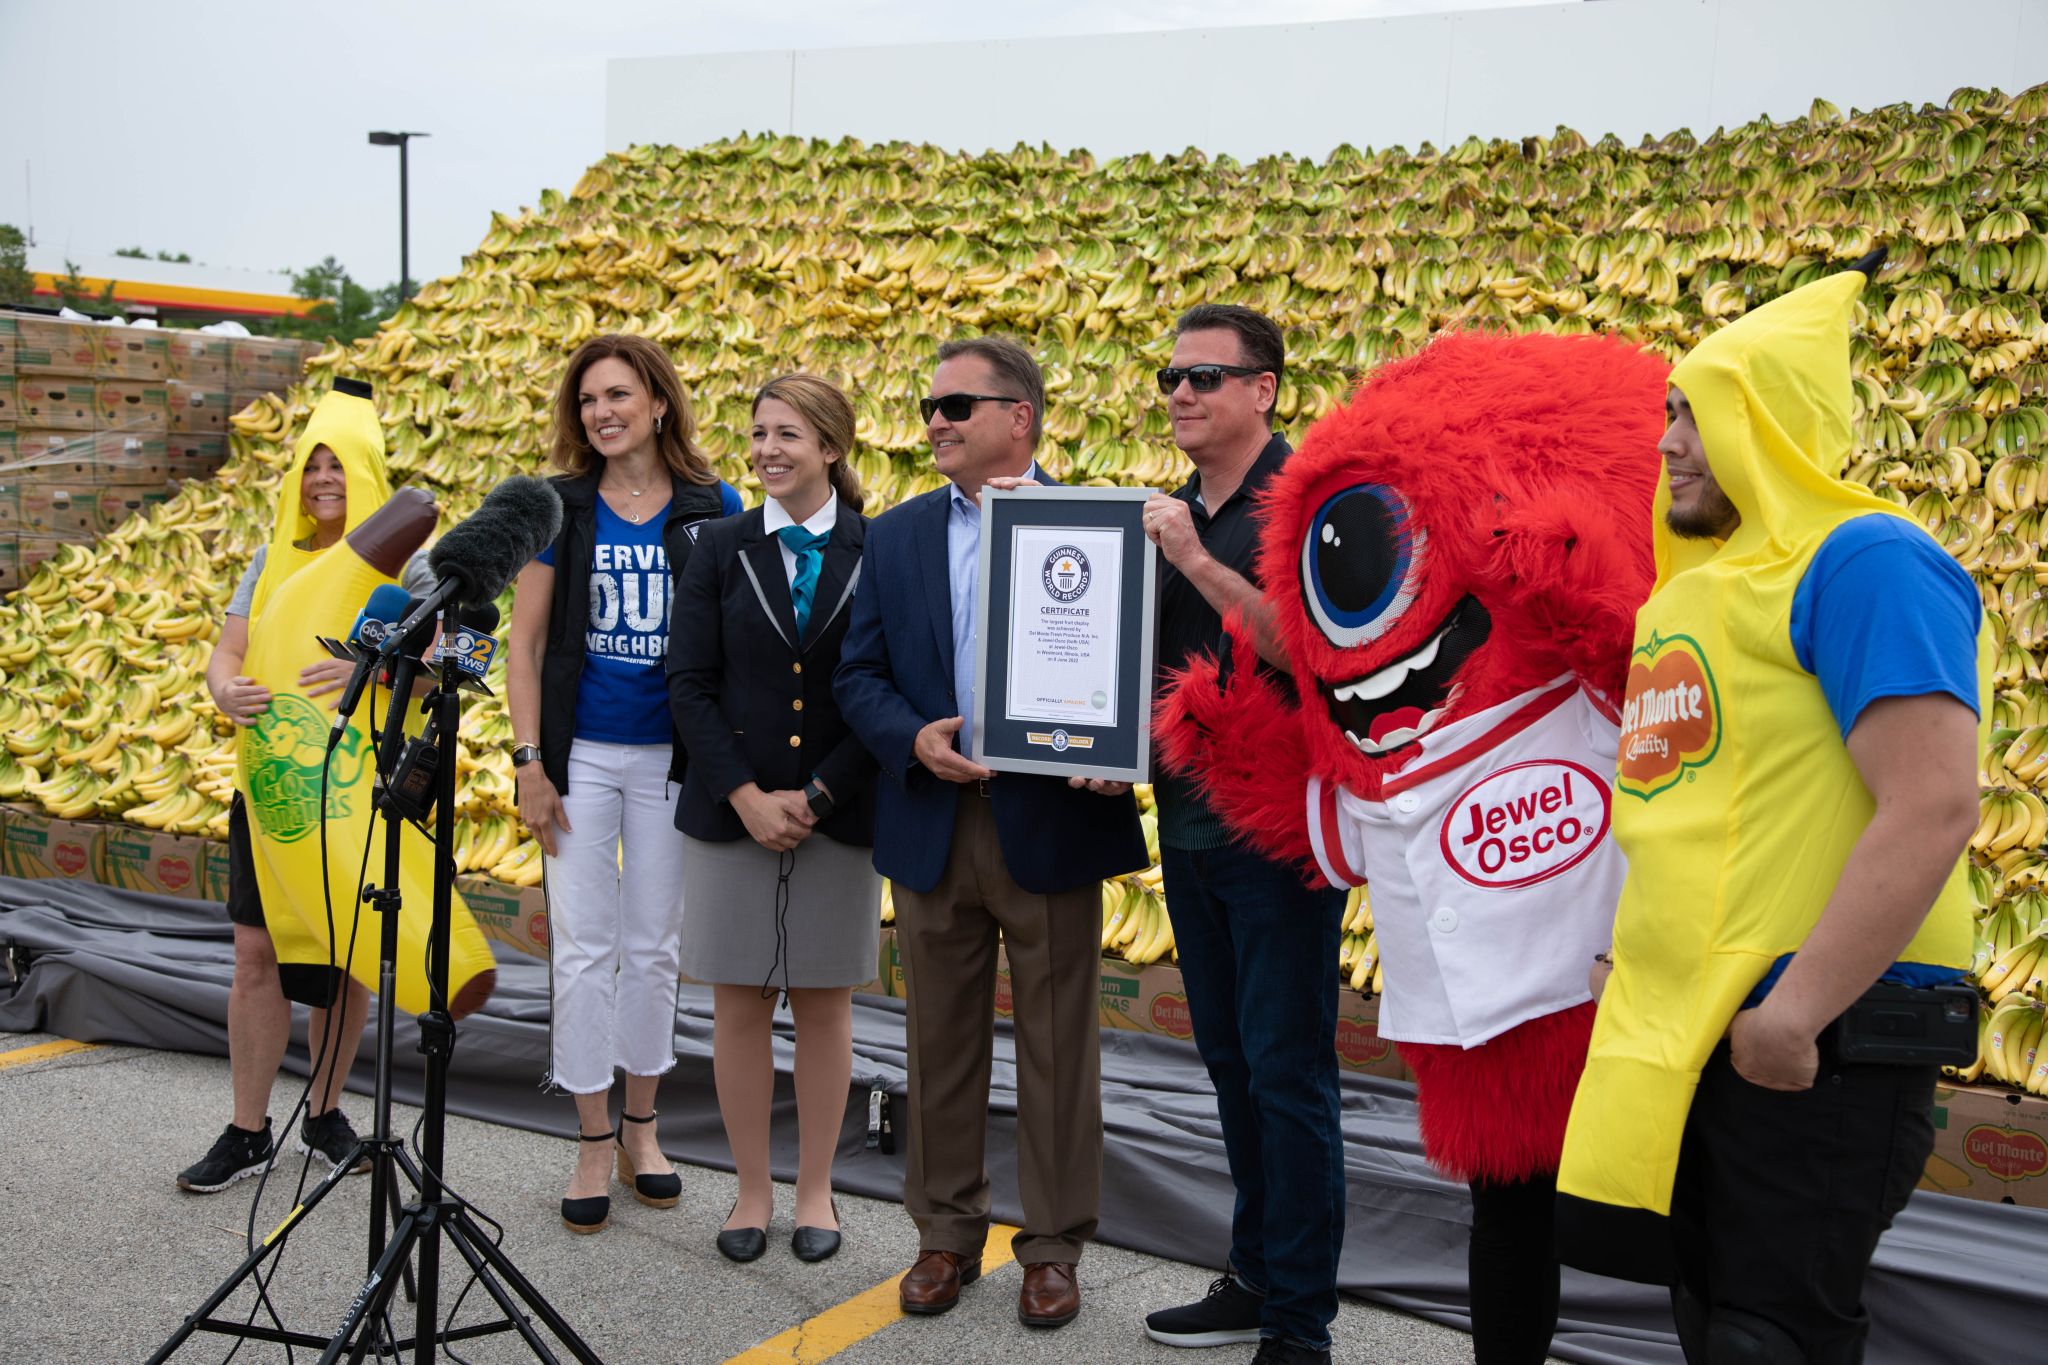 The world’s largest fruit display awarded to Jewel-Osco in Westmont (US) in collaboration with Del Monte Fresh Produce. Credit: Del Monte.